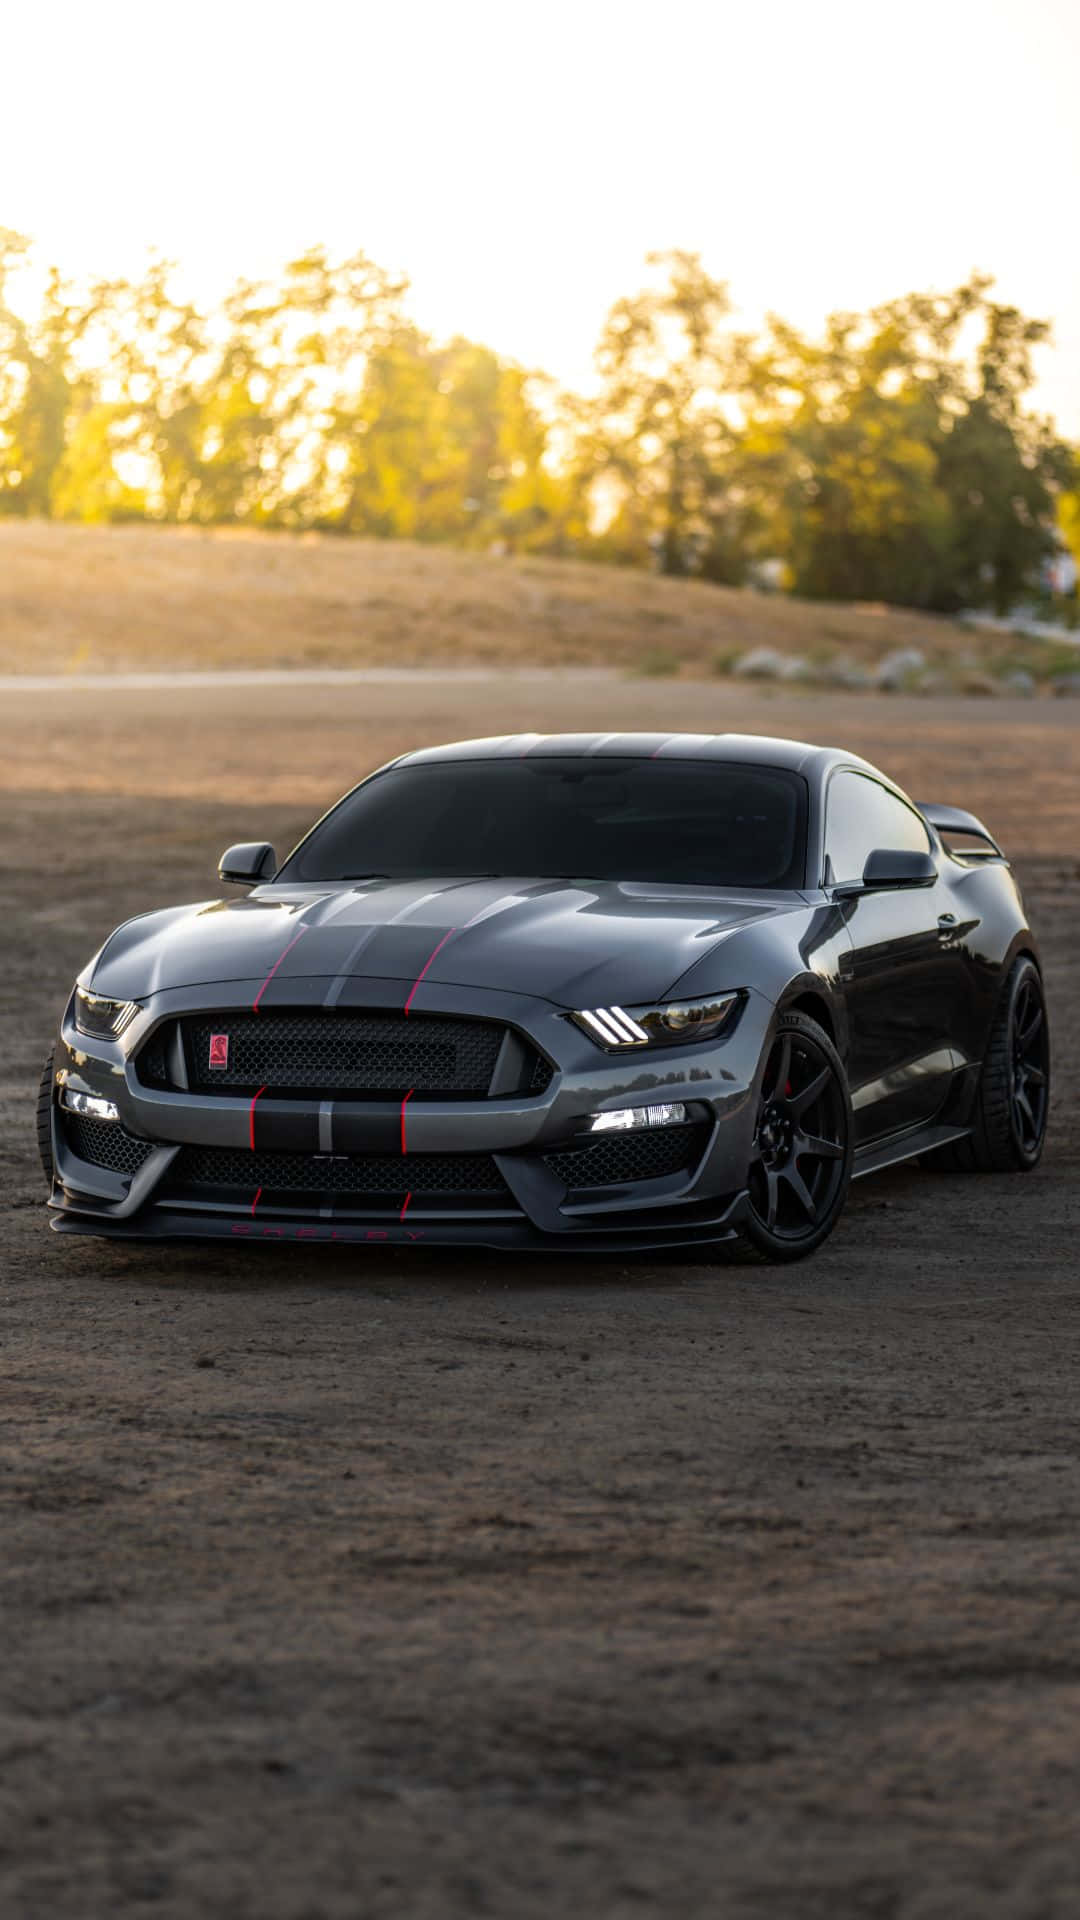 Stunning Ford Mustang in Motion